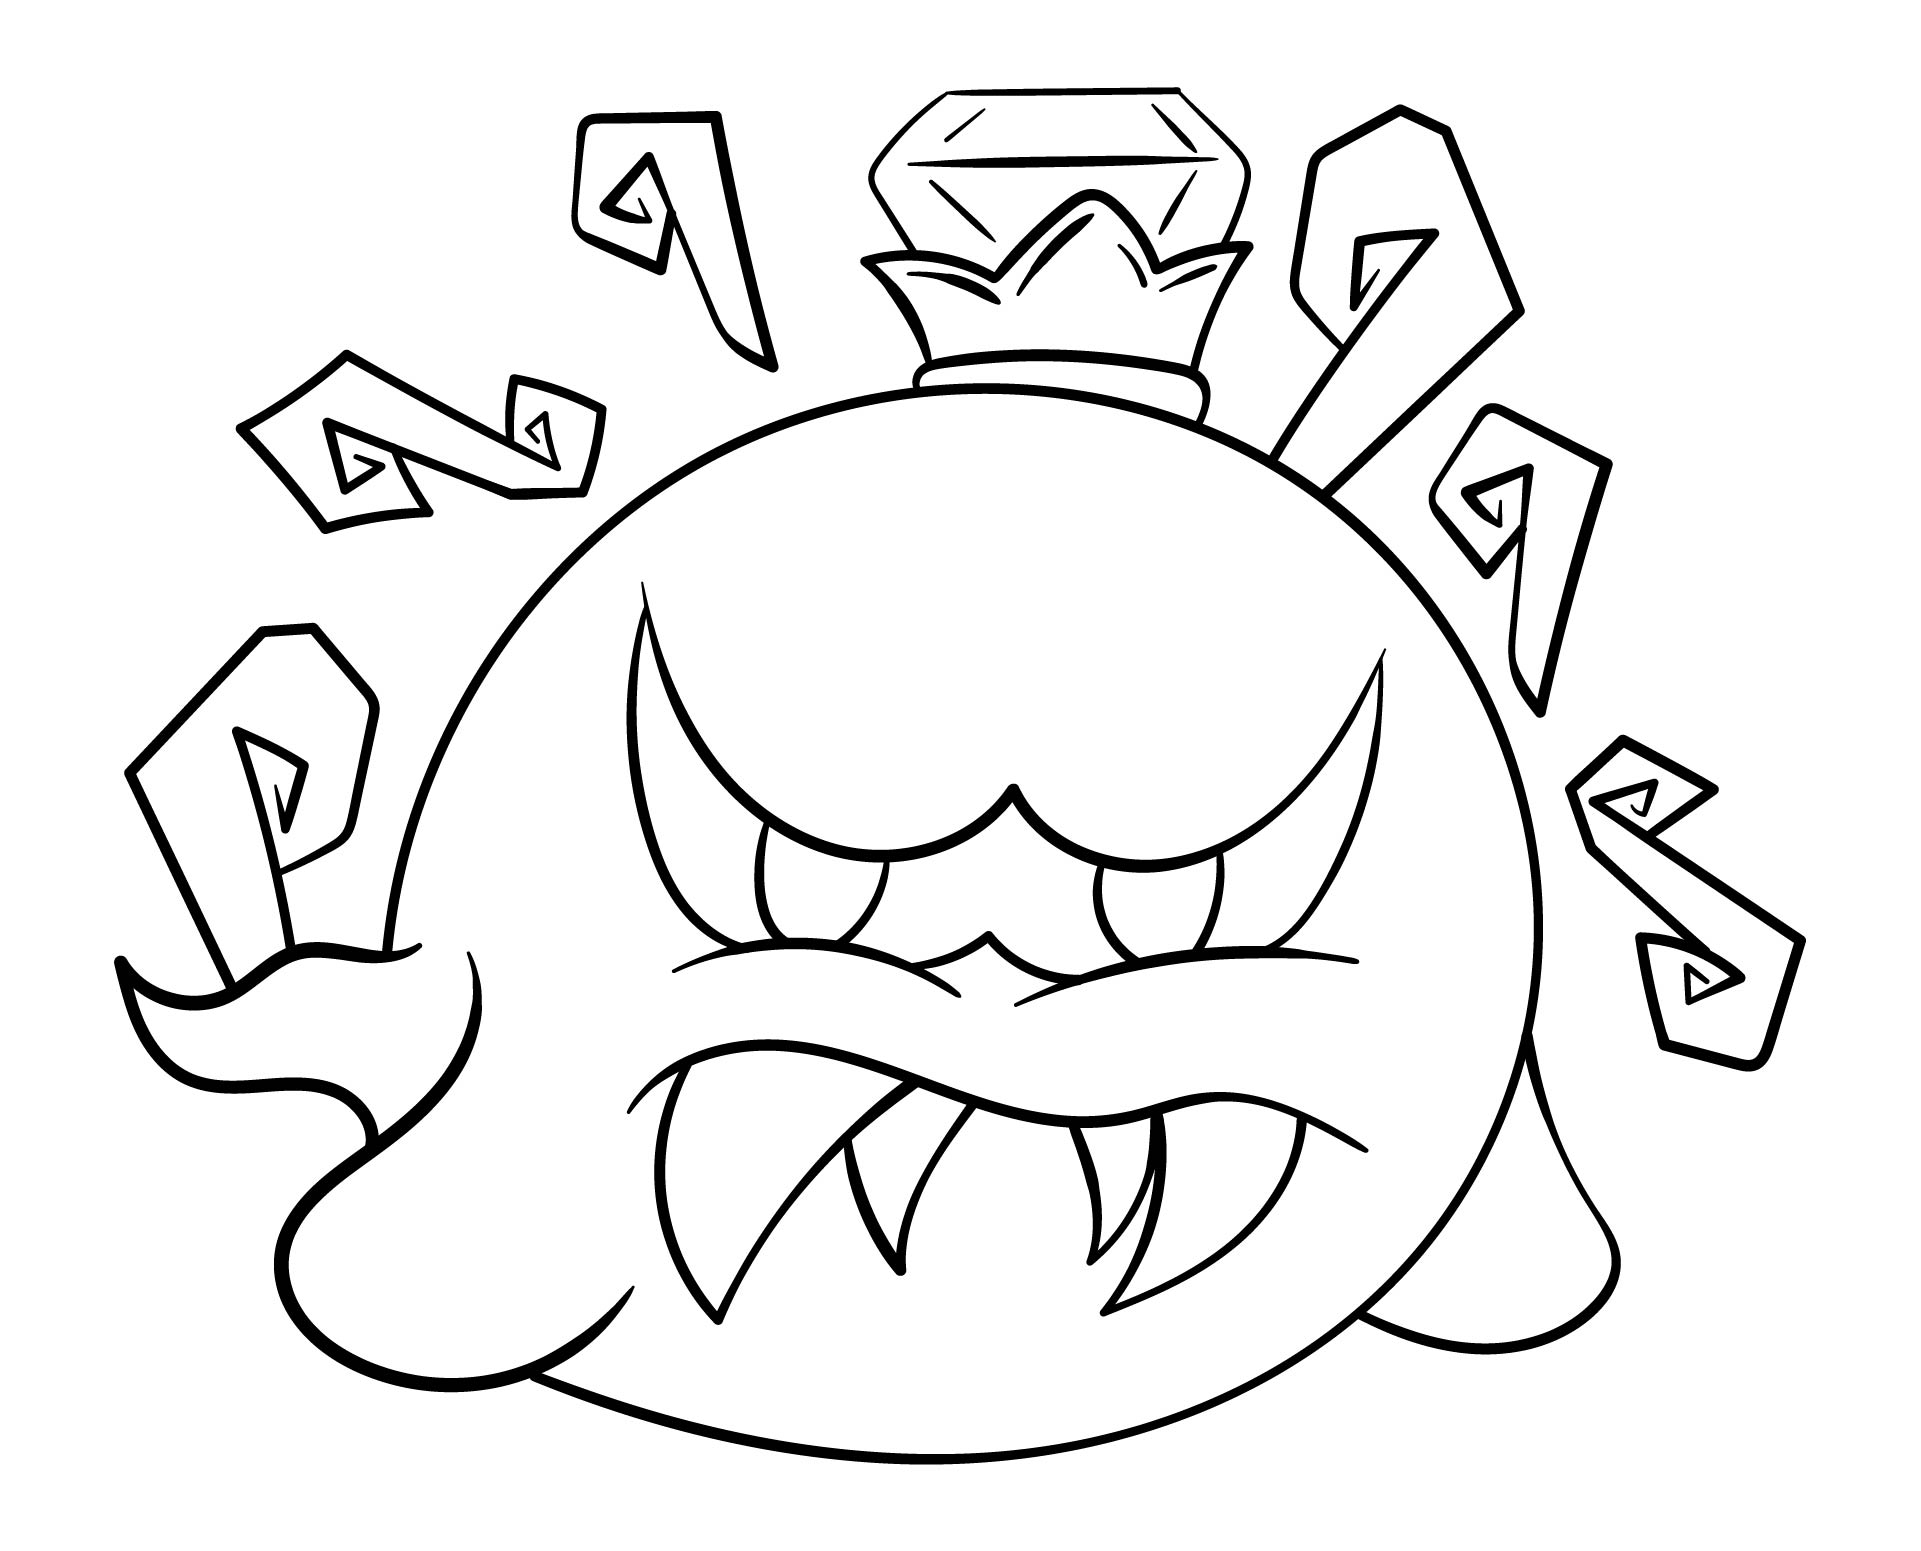 Mario King Boo Coloring Pages